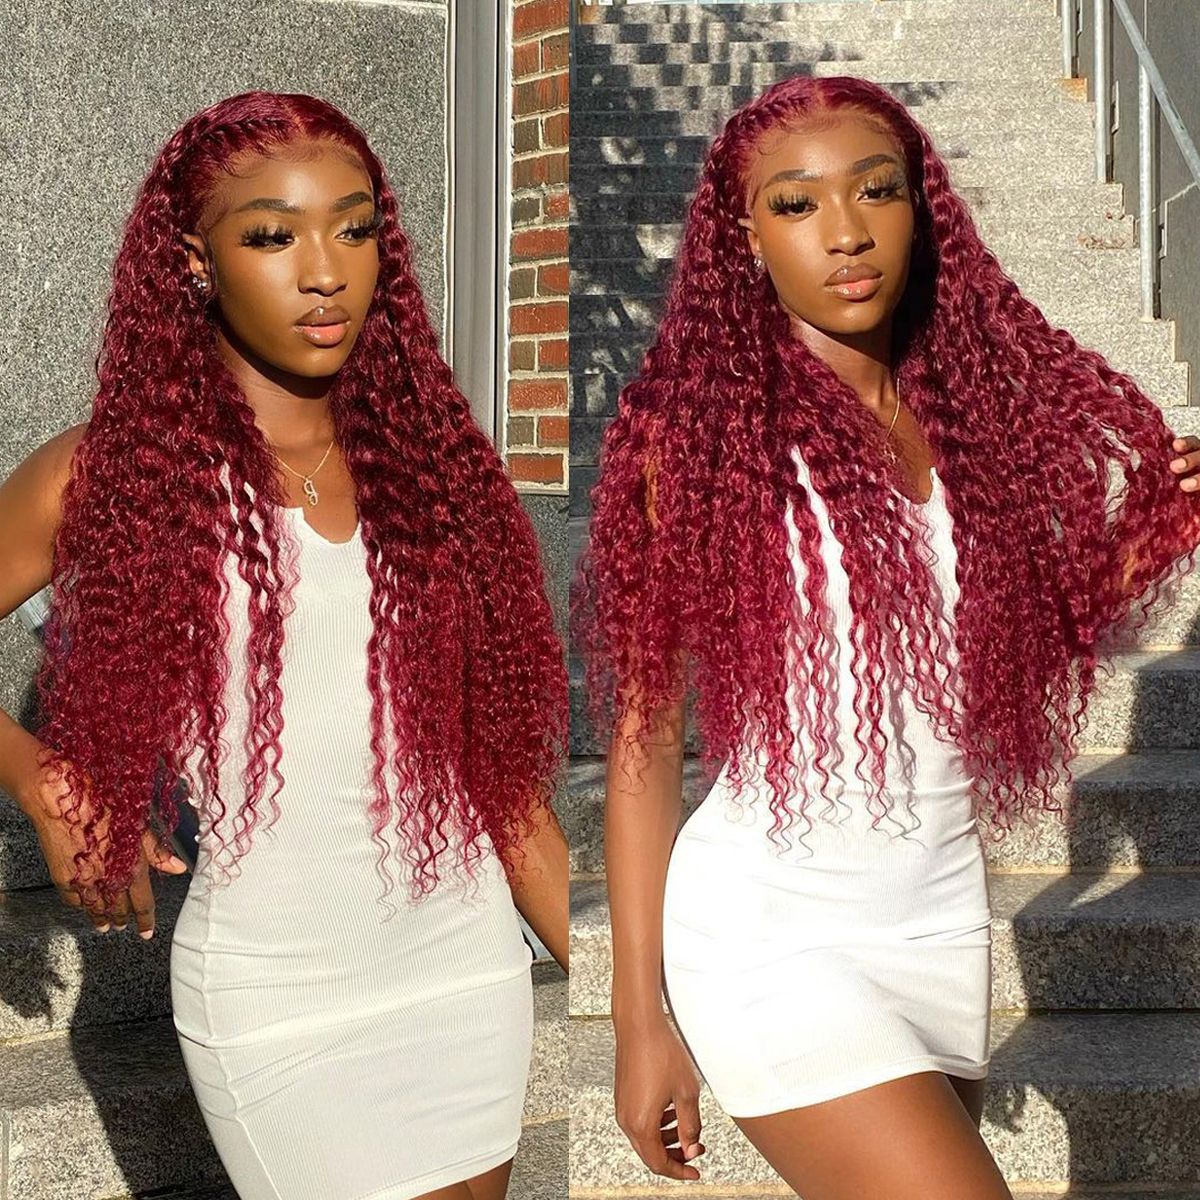 QVR 99J Burgundy Deep Wave Wigs Remy Human Hair Glueless Wigs 16-30 Inch Colored Curly 13x4 Lace Frontal Wigs